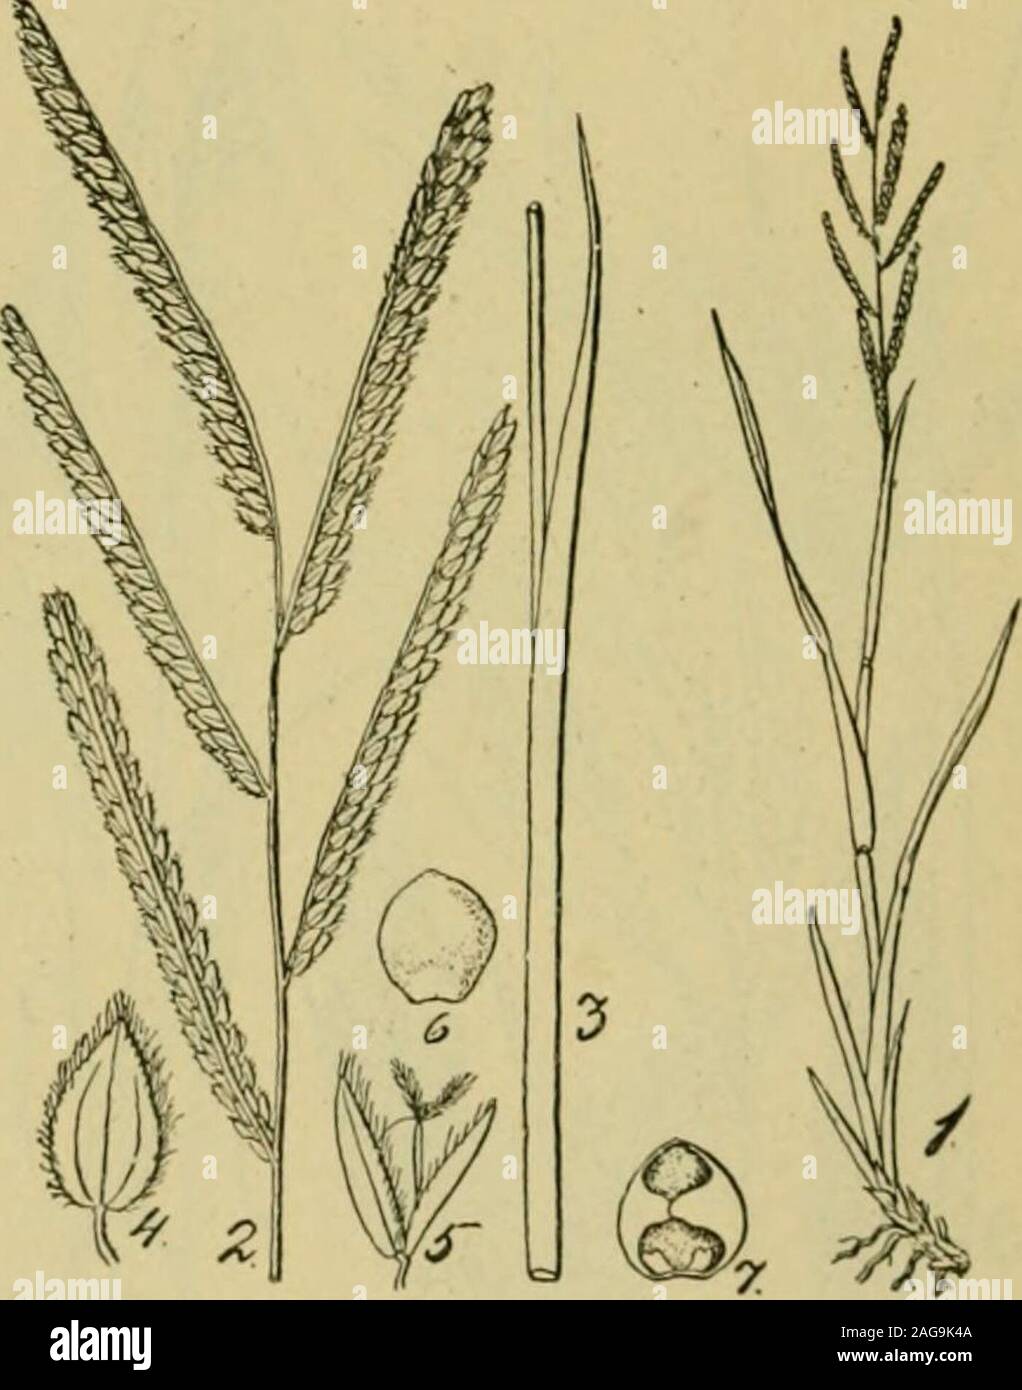 . Grasses and forage plants, by J.B. Killebrew. cing a strange grass with unknown qualities that may prove to be anenemy. HAIRY FLOWERED VKSVKJ5^l—{Paspalum ovatum or dilatatinn.—(Pastures.)This is a perennial, said to be a native of Brazil, and is considered anexcellent grass for late pastures, as it makes its principal growth inautumn. Dr. Gattinger, of Nashville, mentions it in his Tennessee Floraas being one of the grasses found in open ground and in grass plots. It 72 grows from two to four feet high and has long narrow leaves. It isgreatly relished by stock and does not appear to have Stock Photo